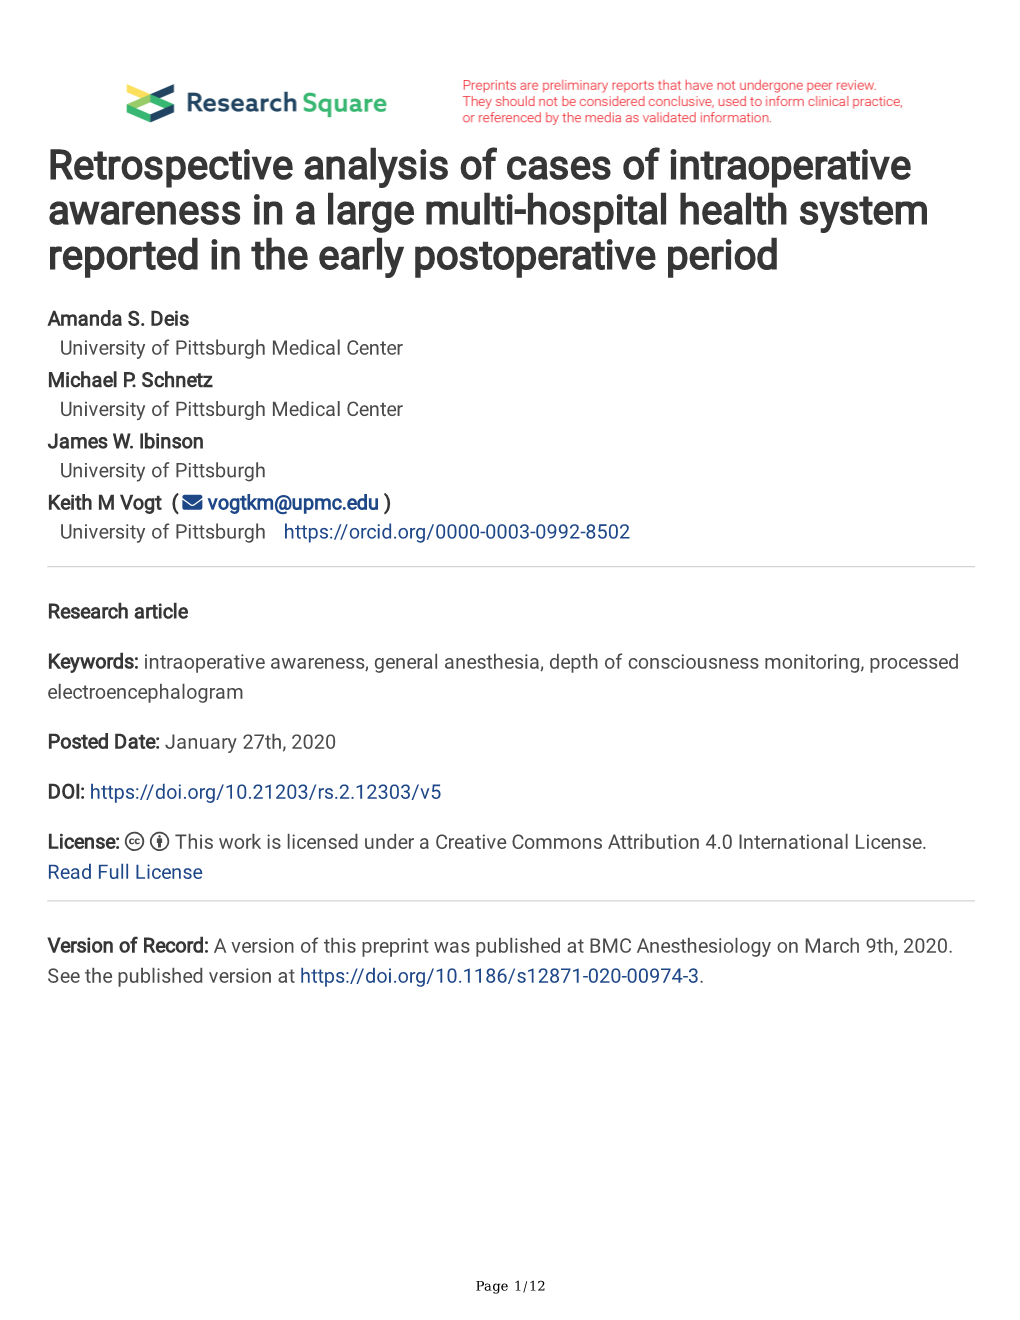 Retrospective Analysis of Cases of Intraoperative Awareness in a Large Multi-Hospital Health System Reported in the Early Postoperative Period